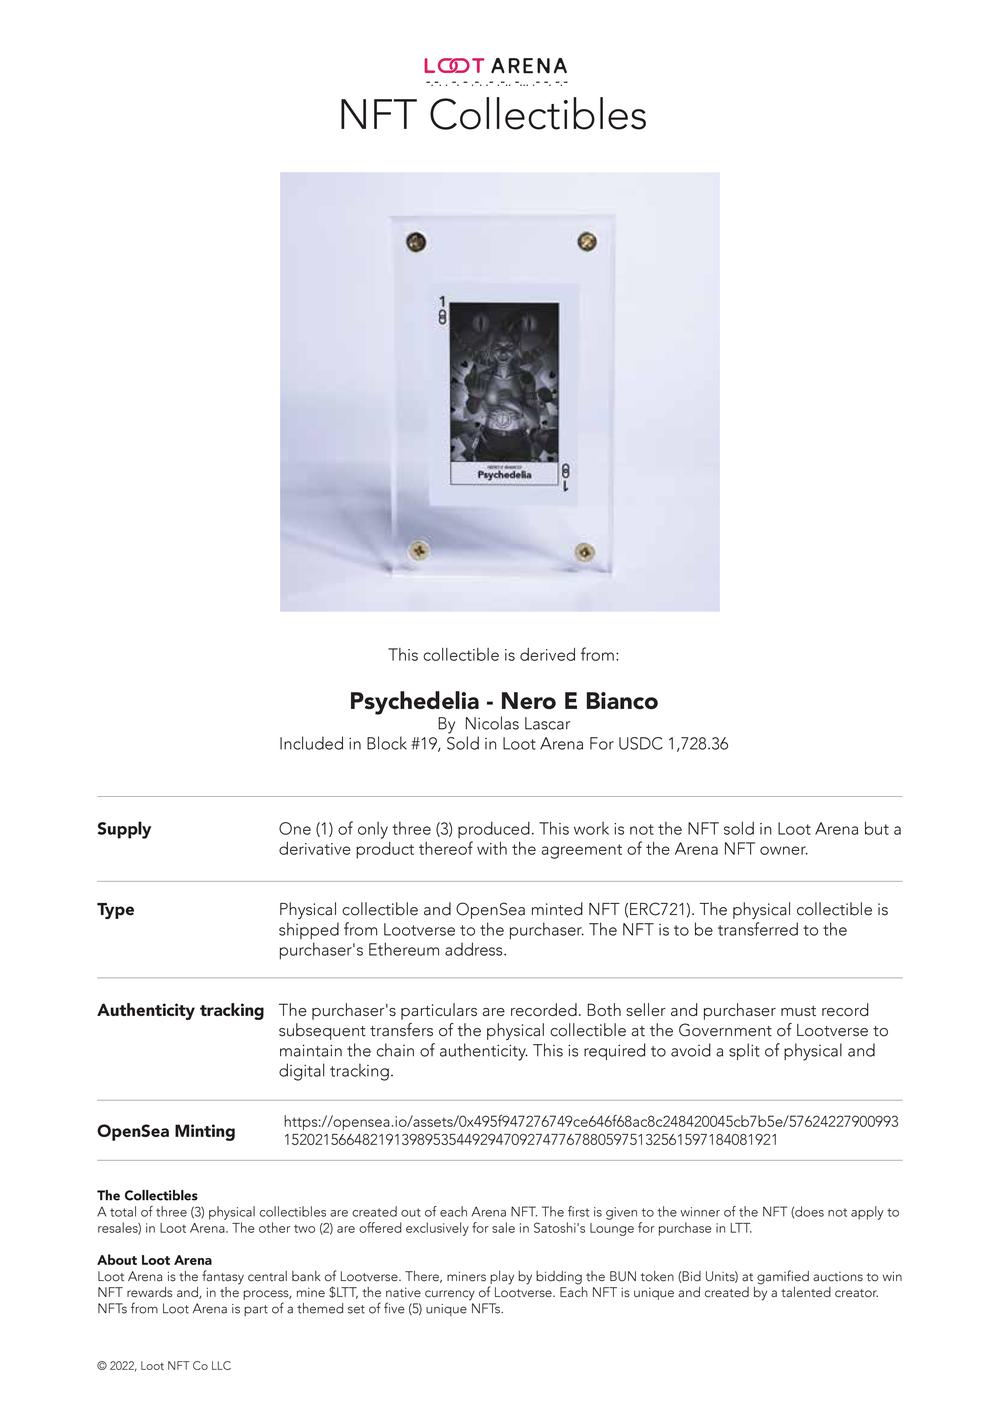 Psychedelia_#1 Collectible_Contract.pdf